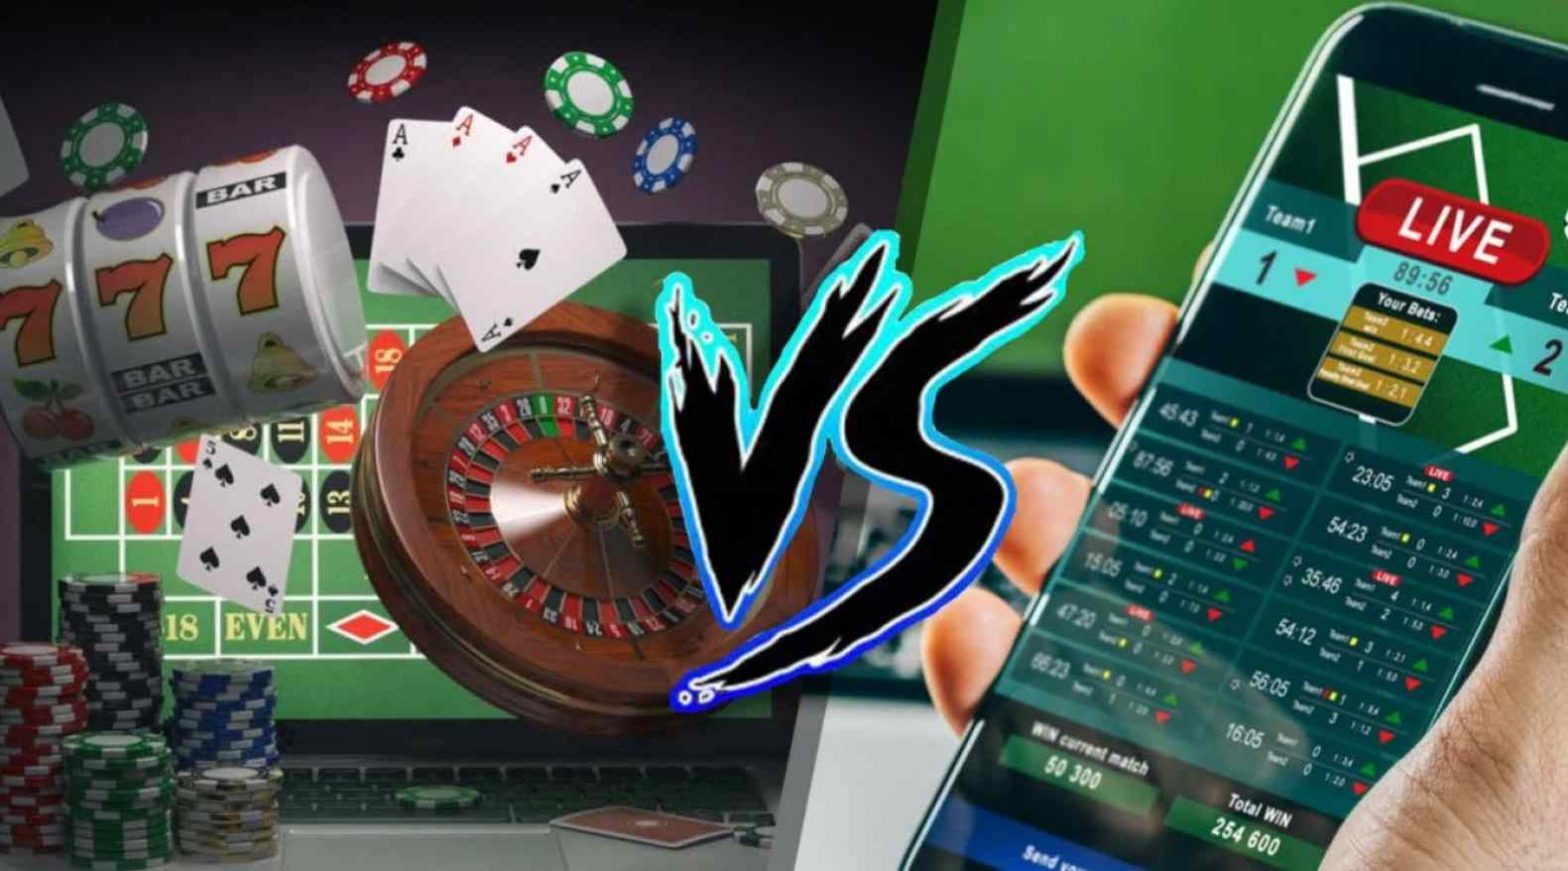 What to choose between sports betting or casinos